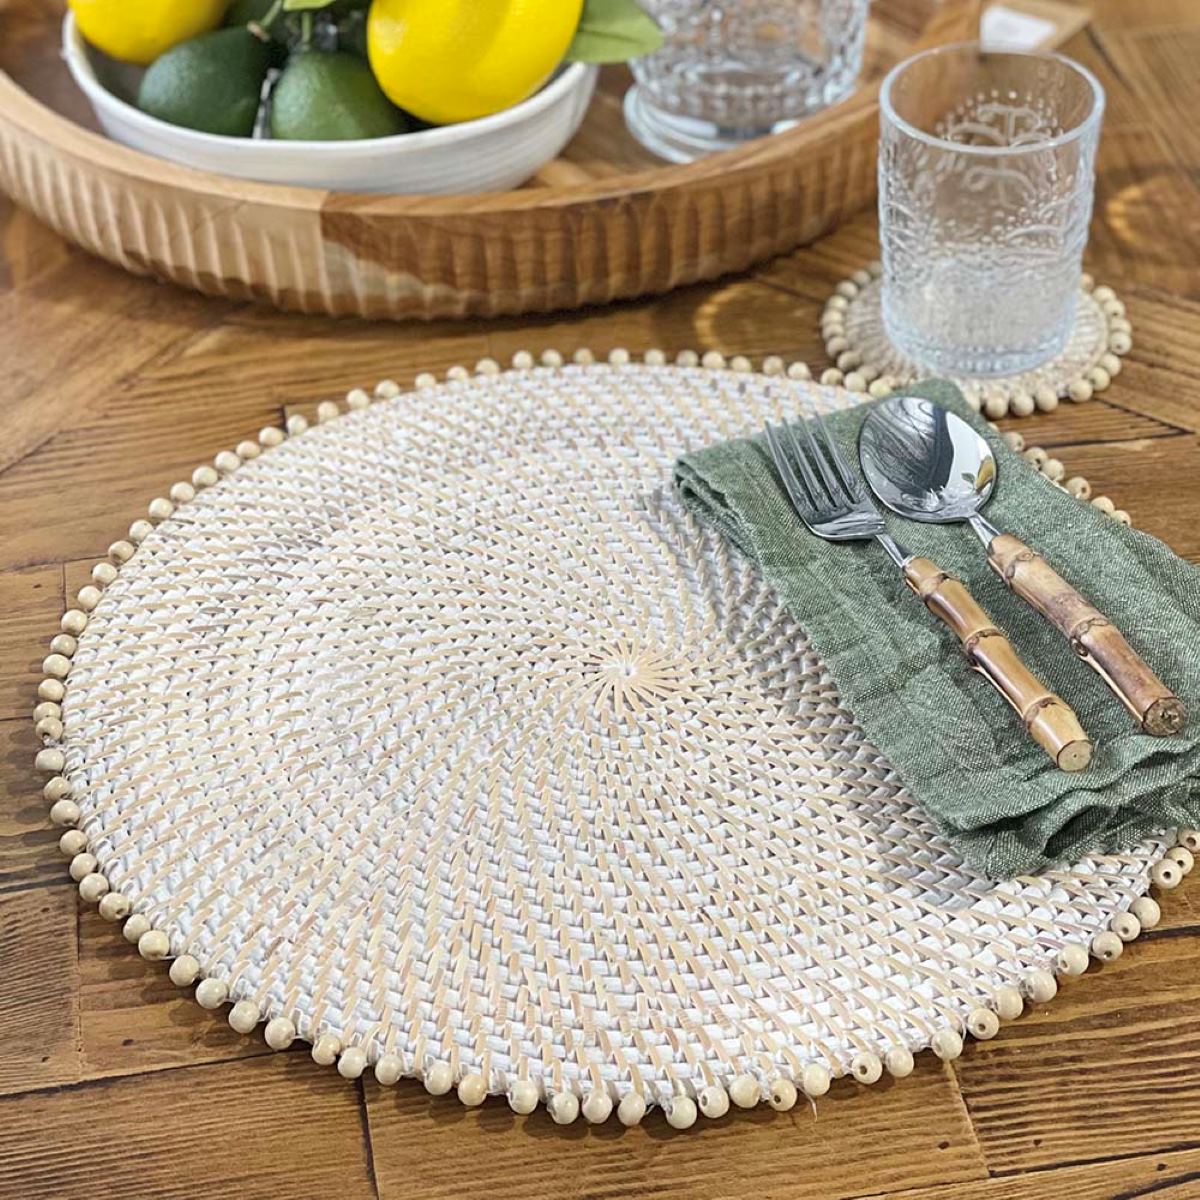 What Material Is Best For Placemats